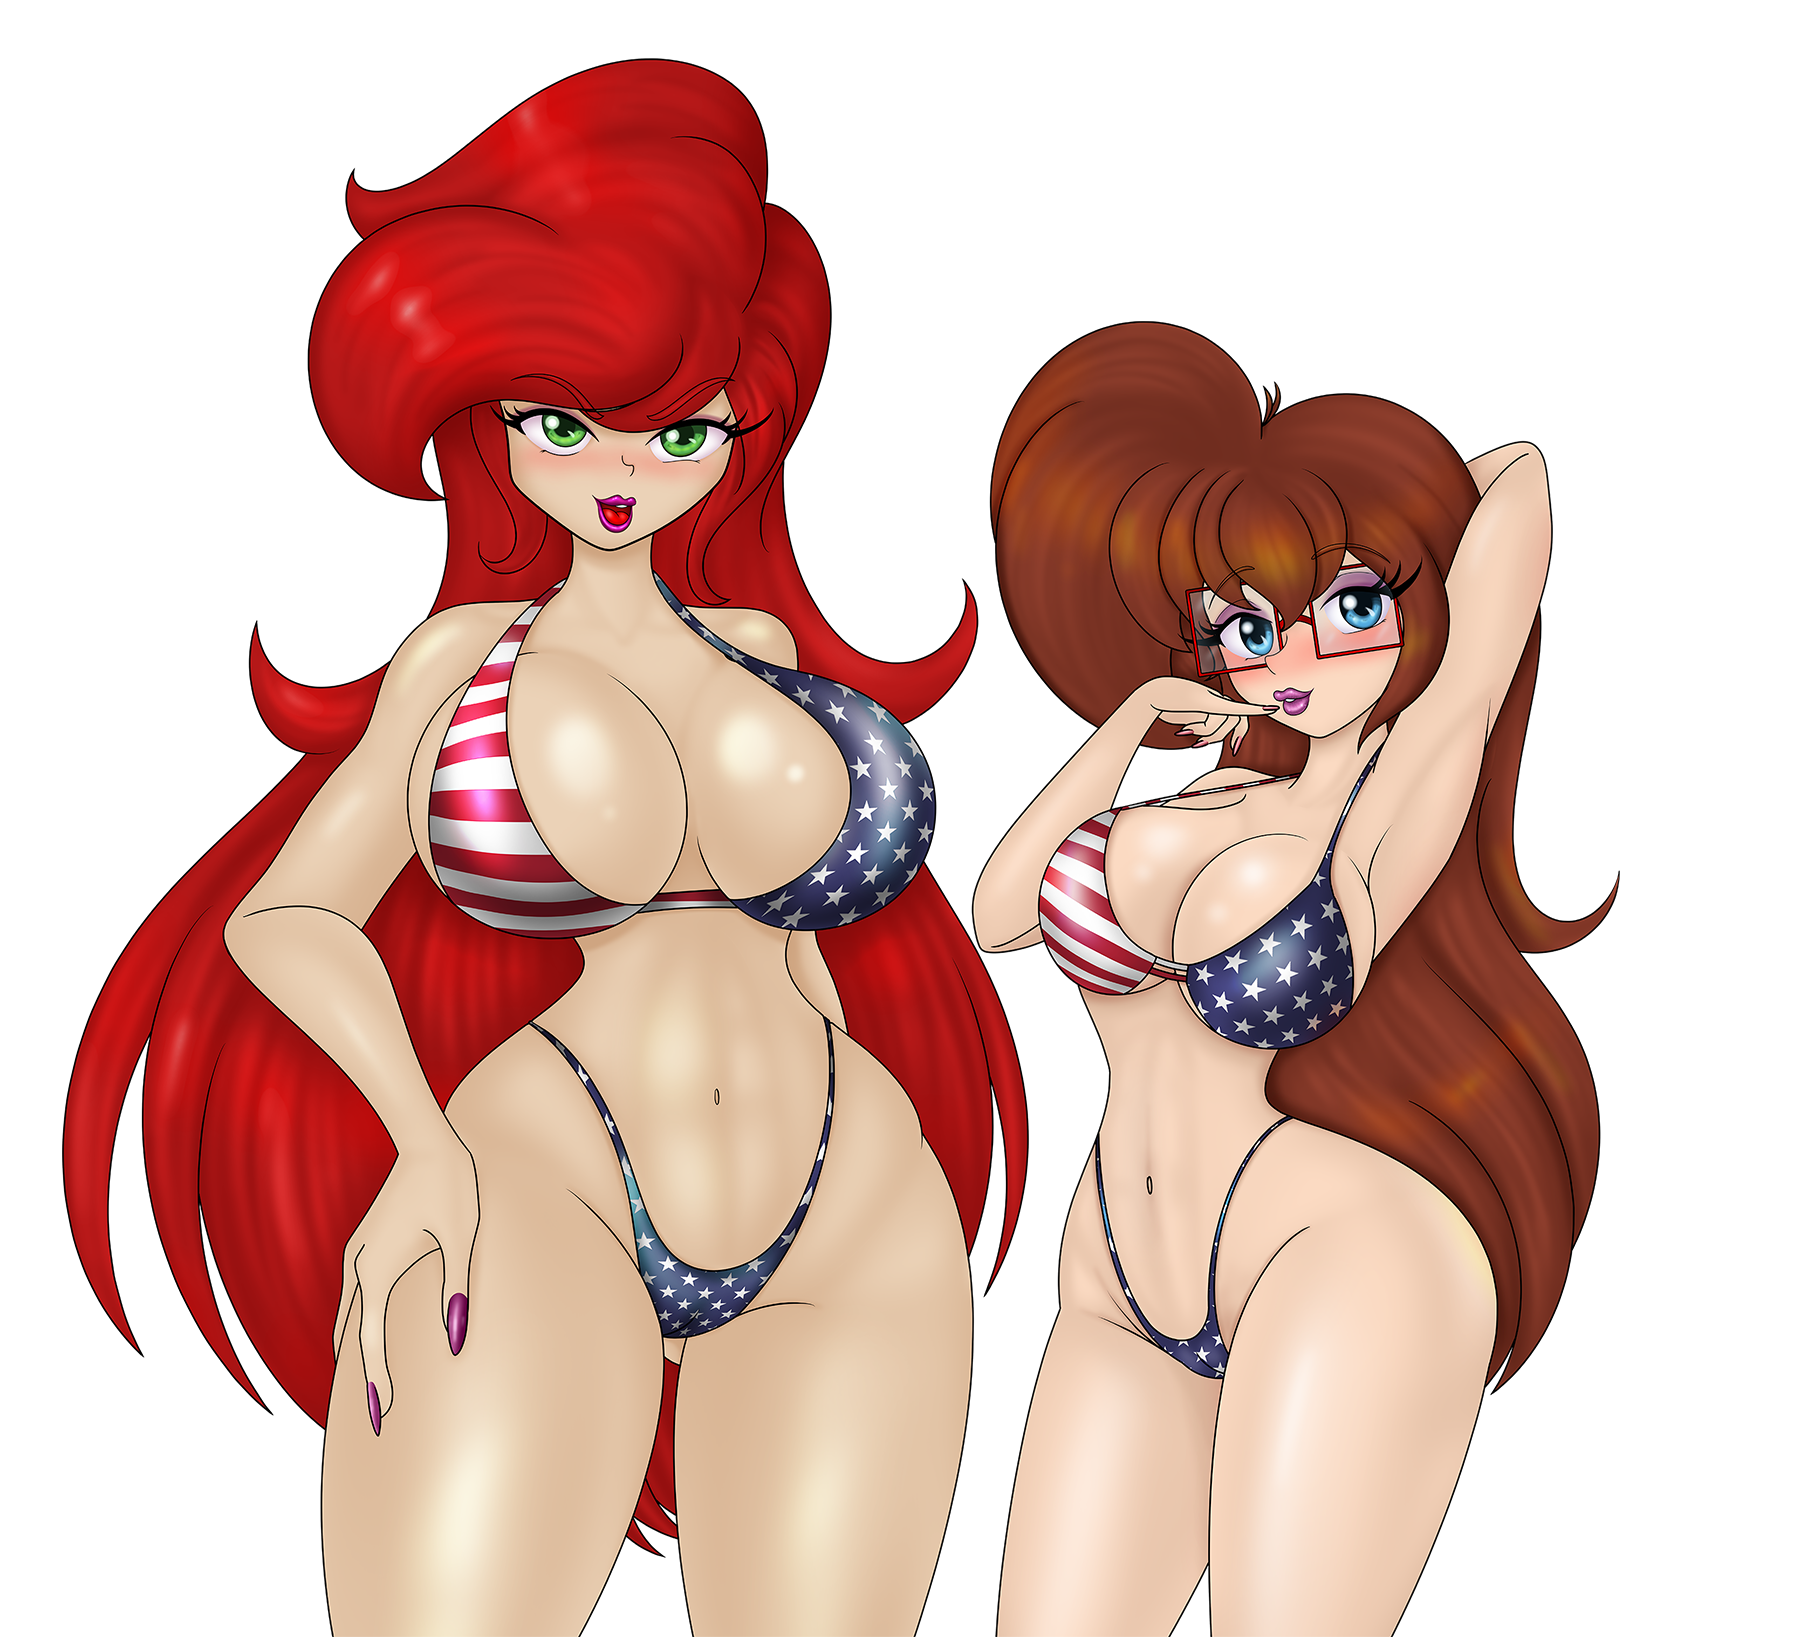 Happy 4th of July, from Red and Mel!